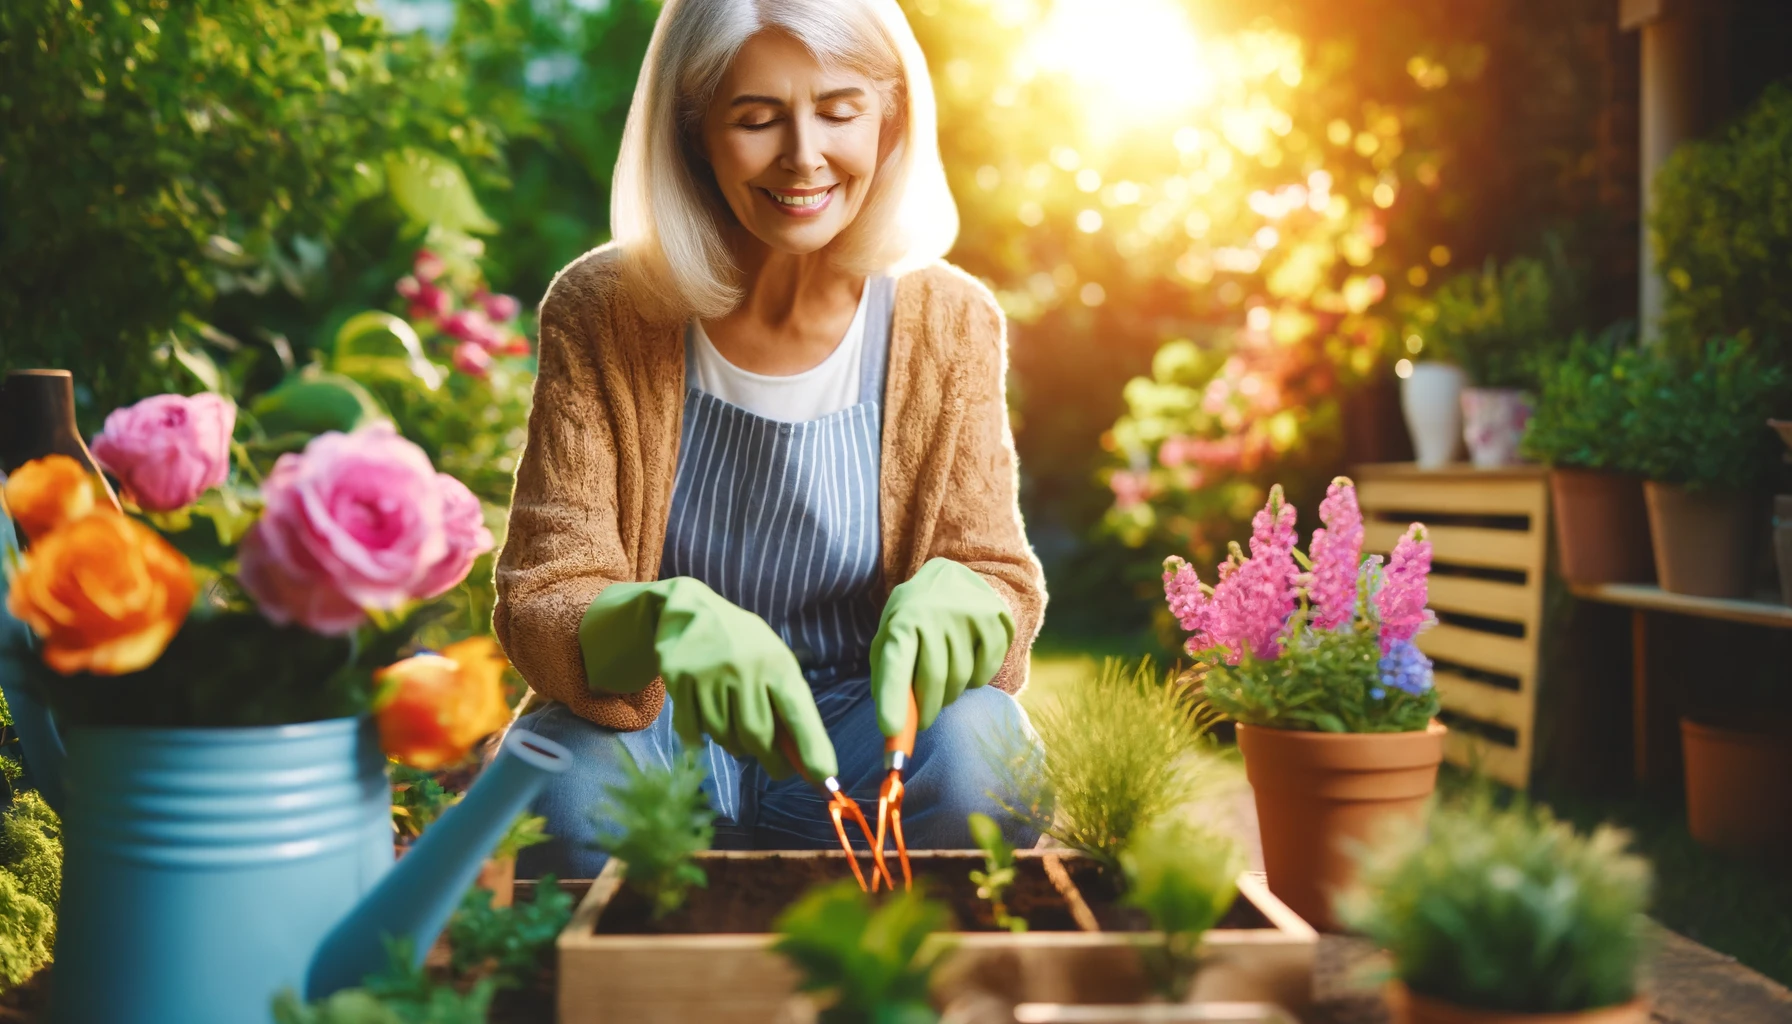 5 Reasons Why Indoor Urban Gardening is Good for You and the Planet Benefits of Gardening for Seniors